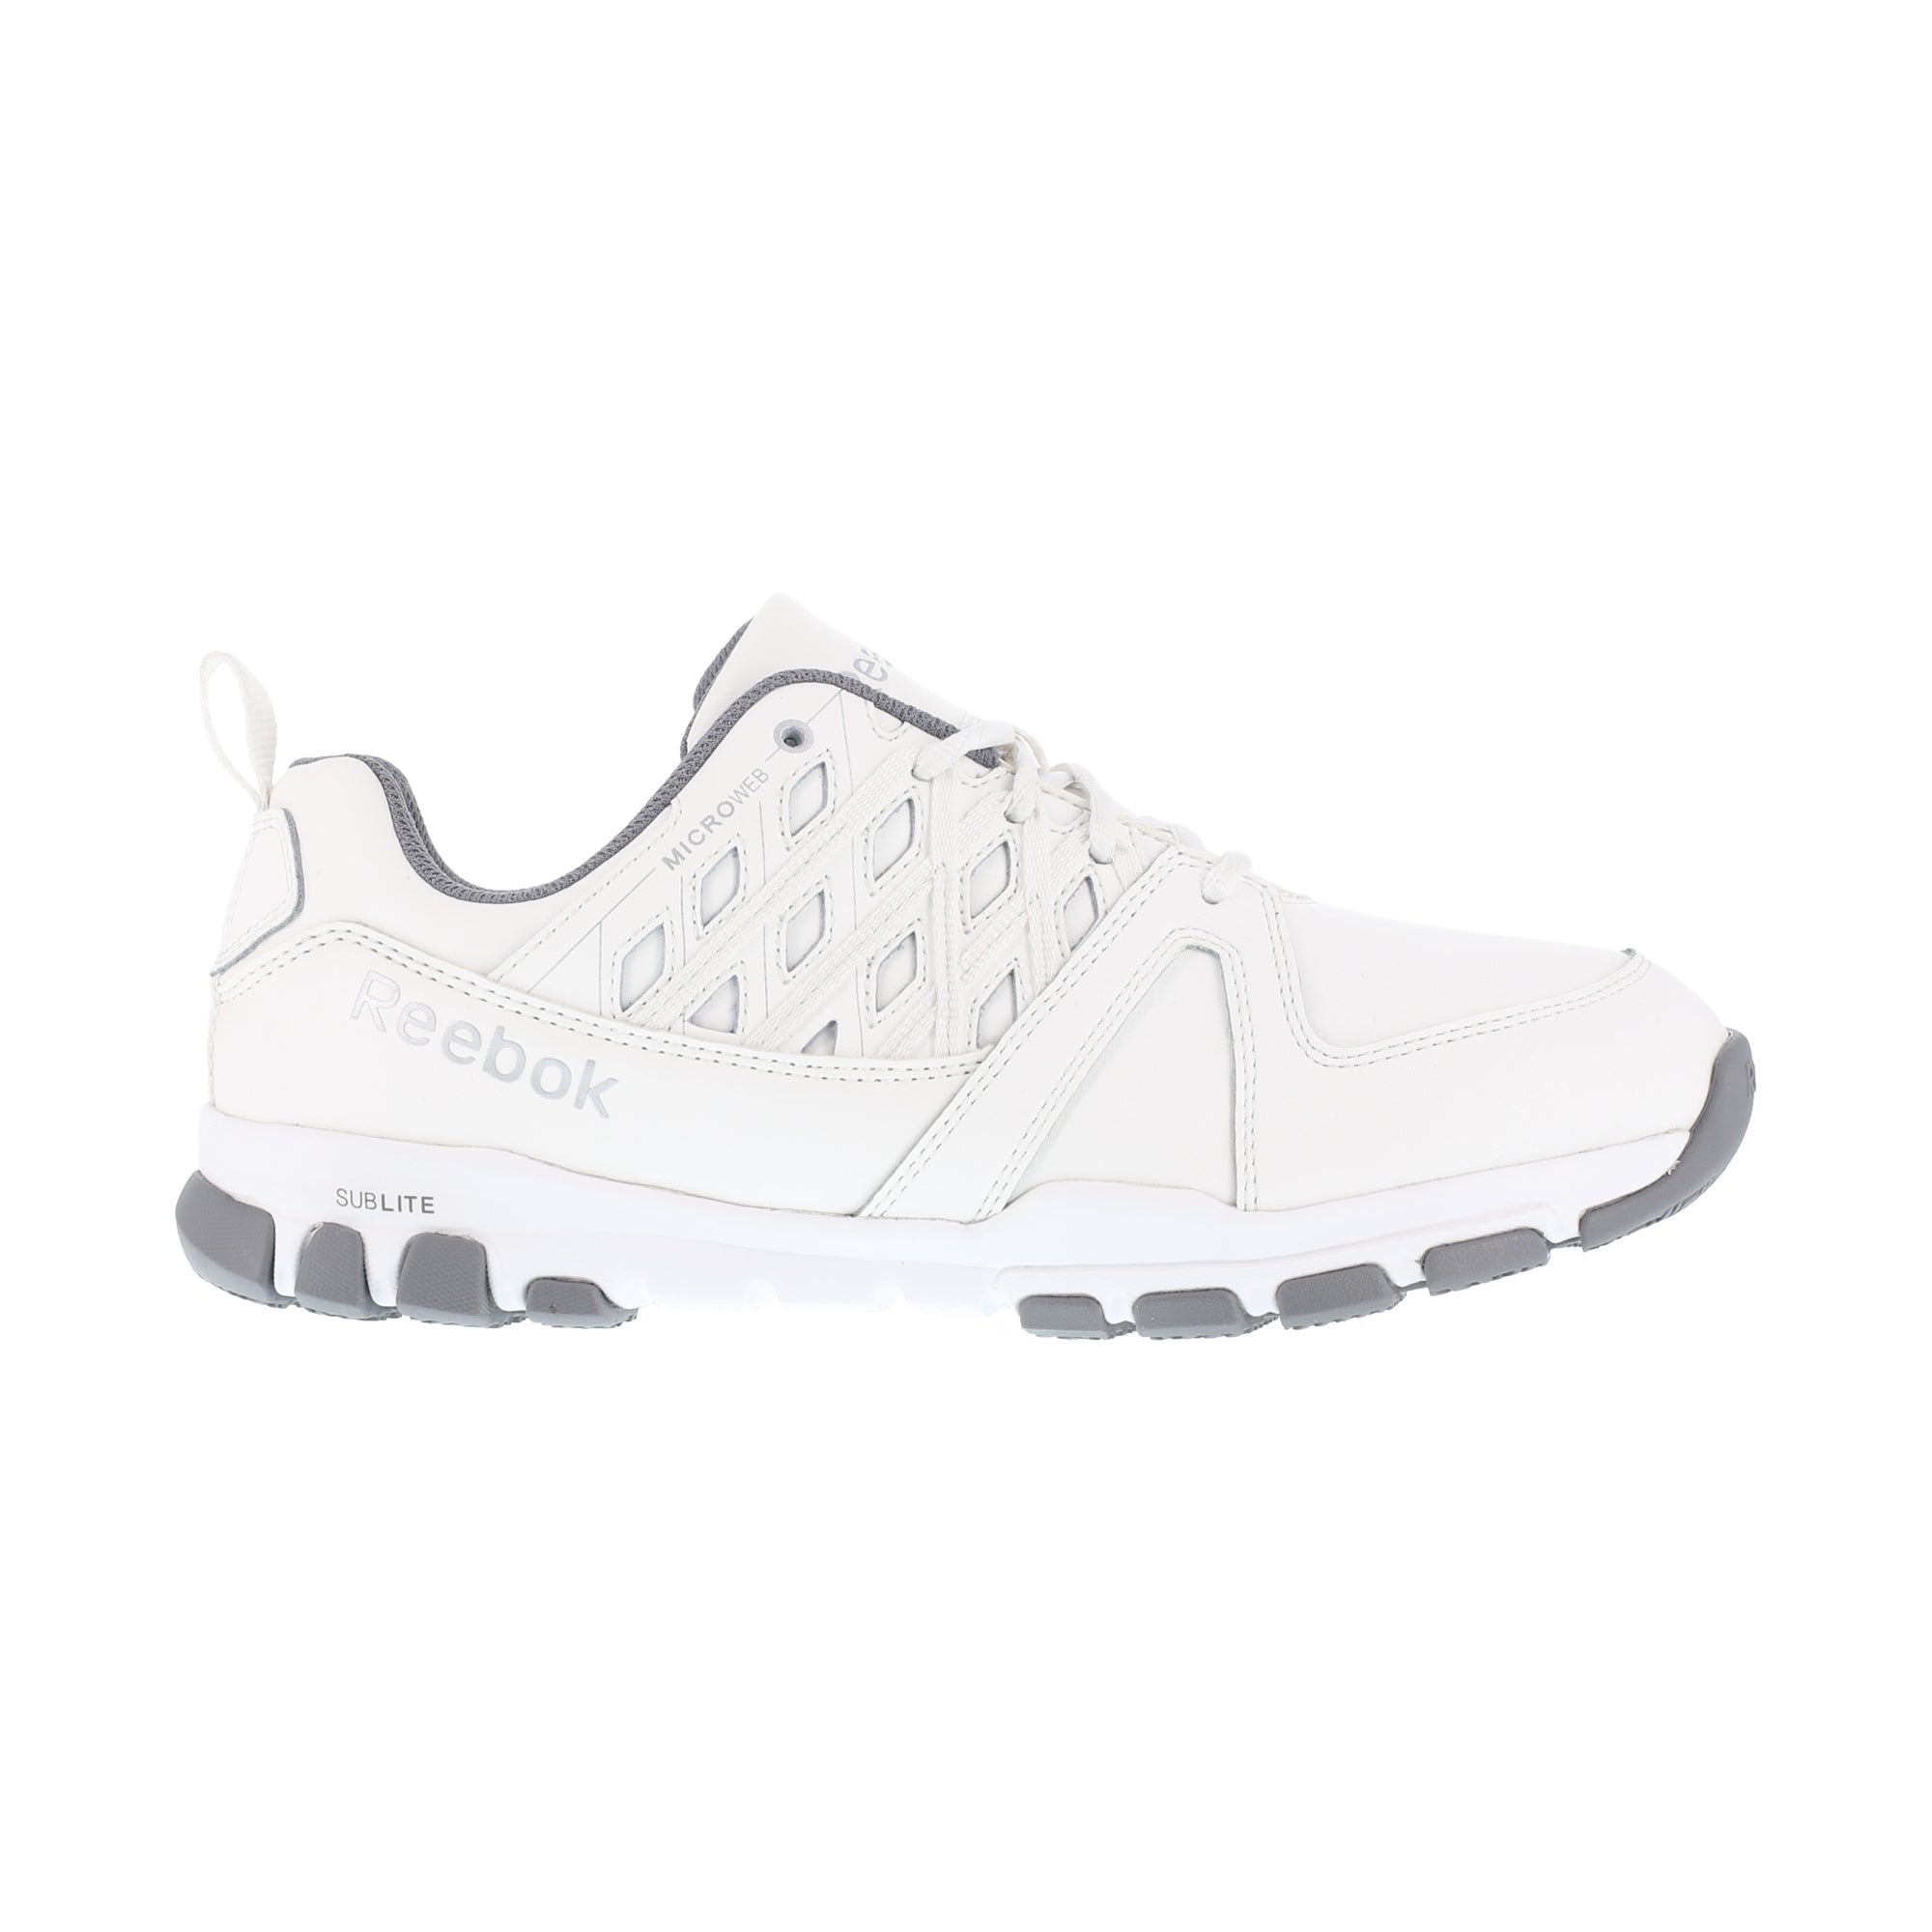 womens white work shoes